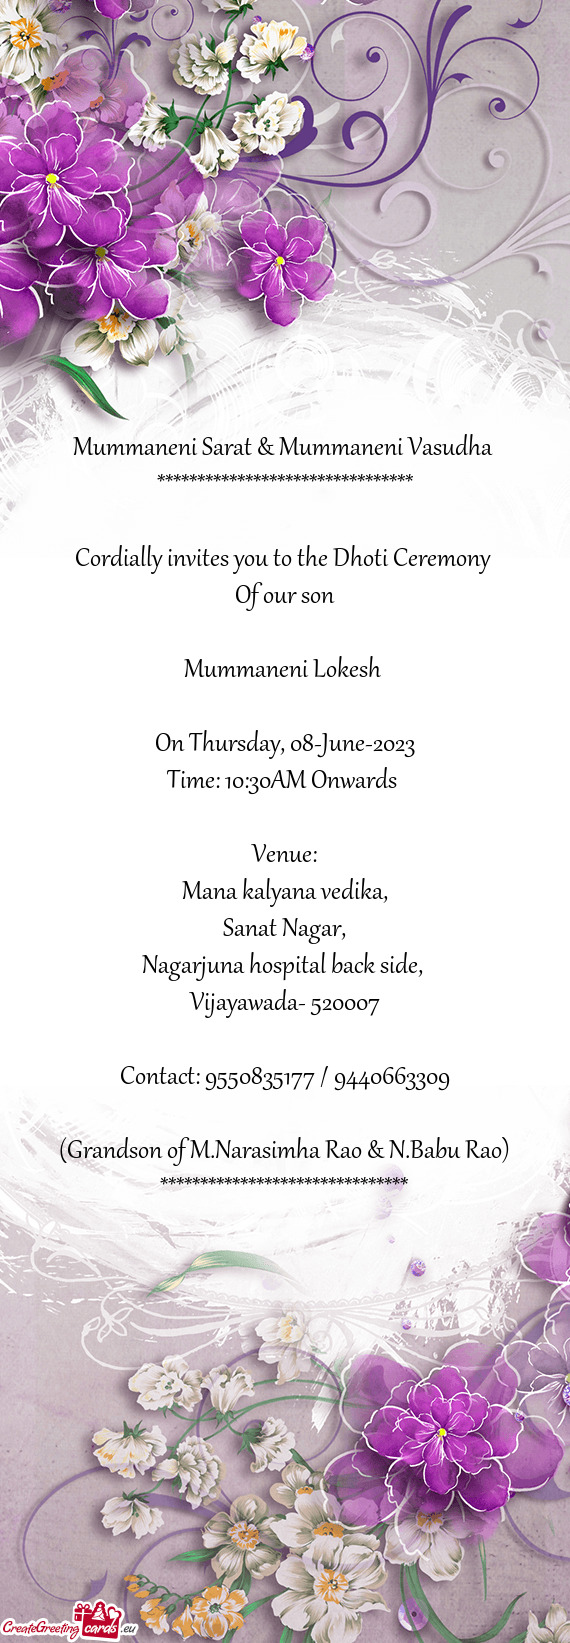 Cordially invites you to the Dhoti Ceremony